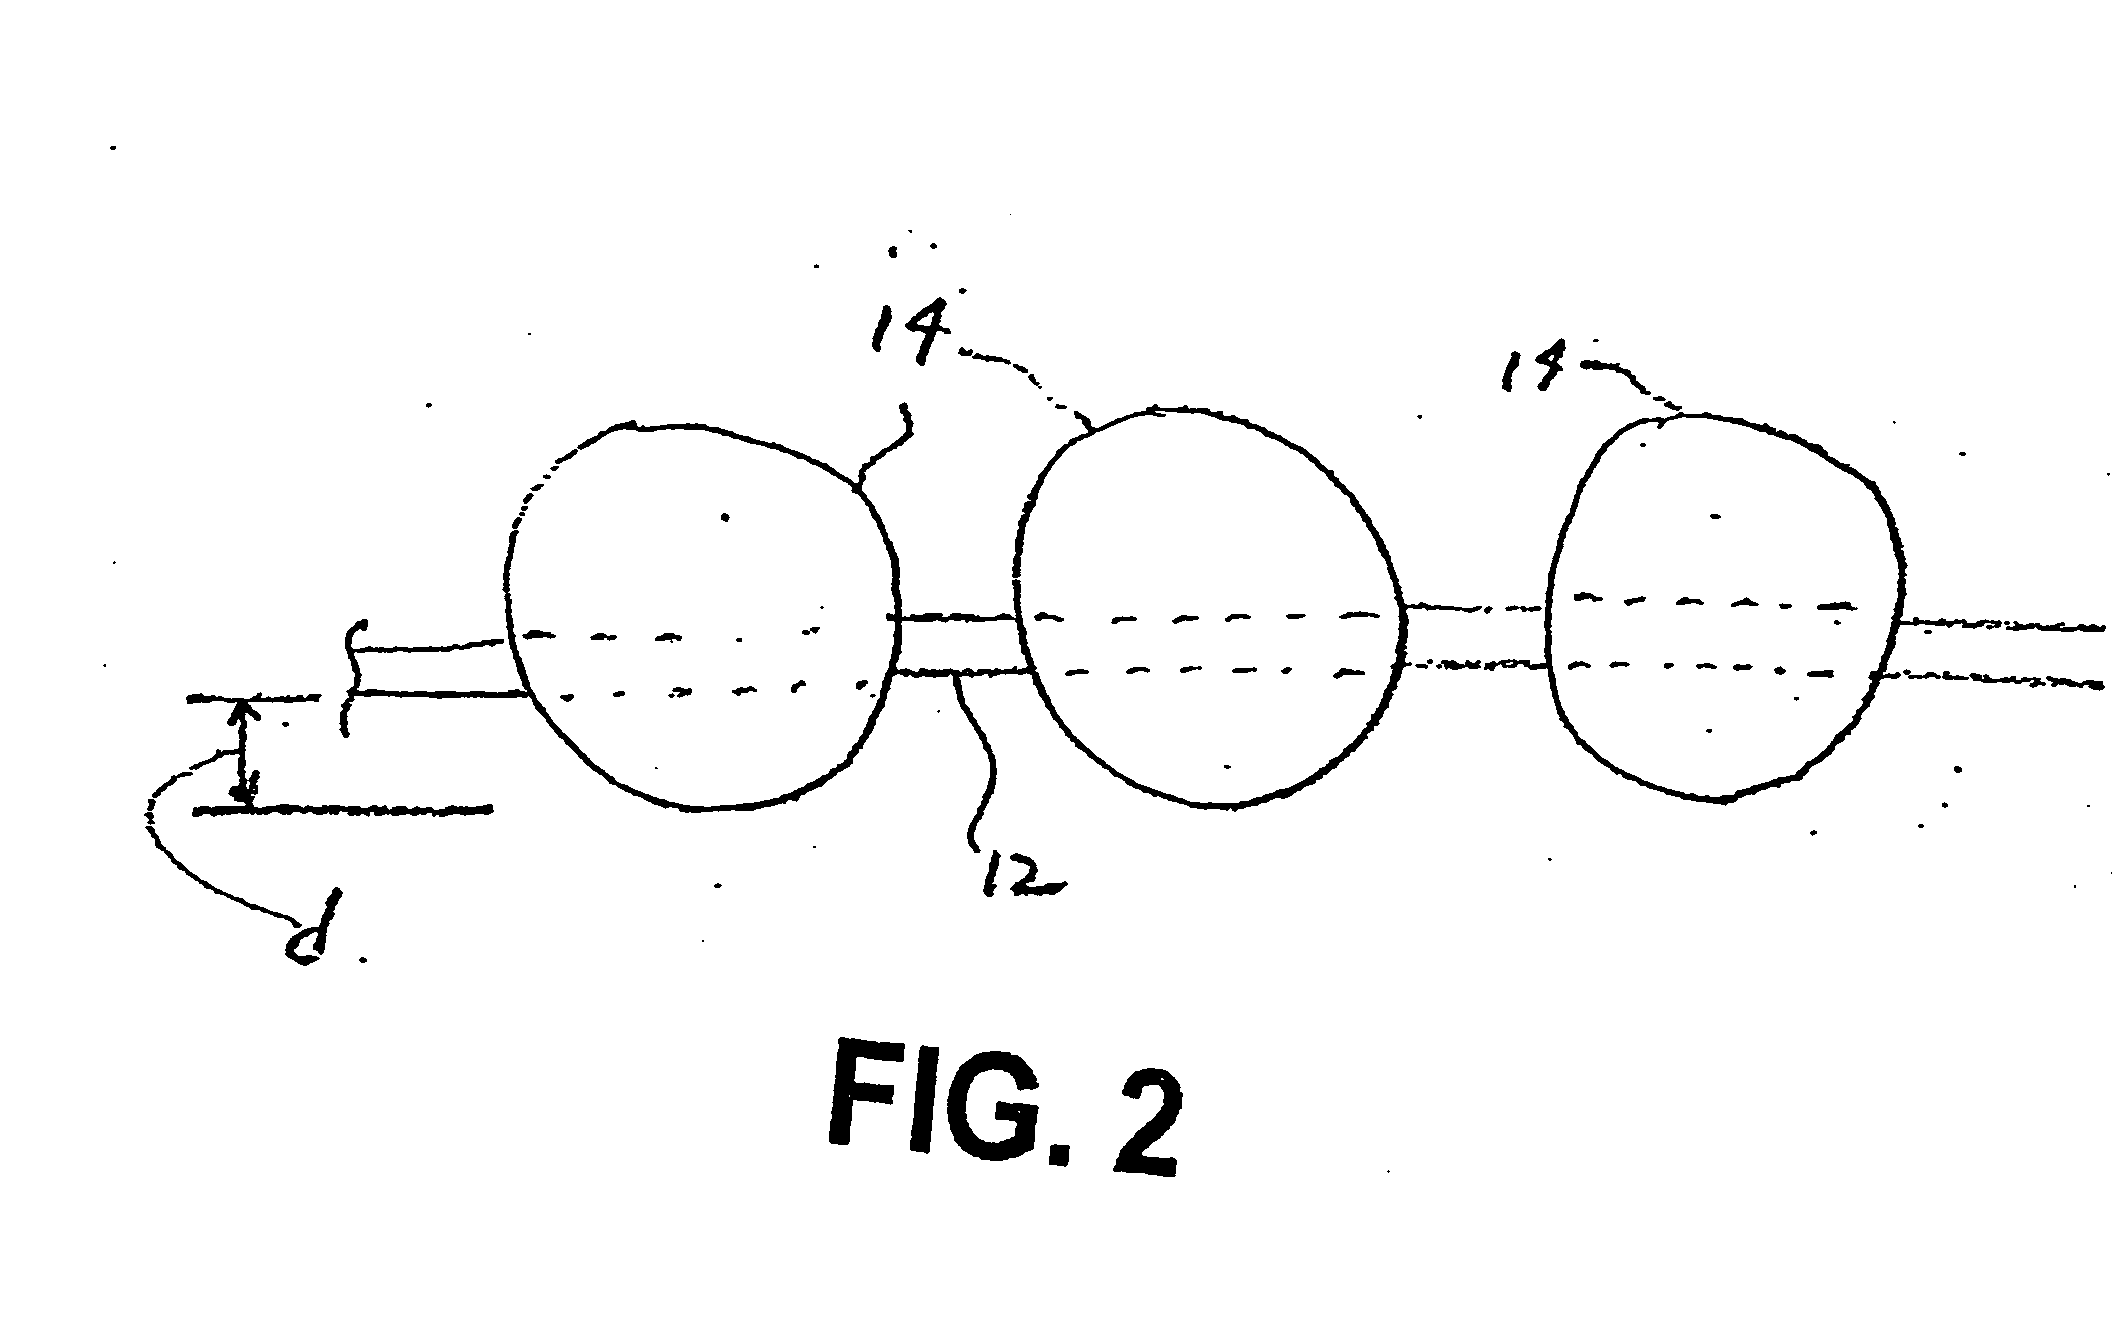 Devices for the delivery of molecular sieve materials for the formation of blood clots